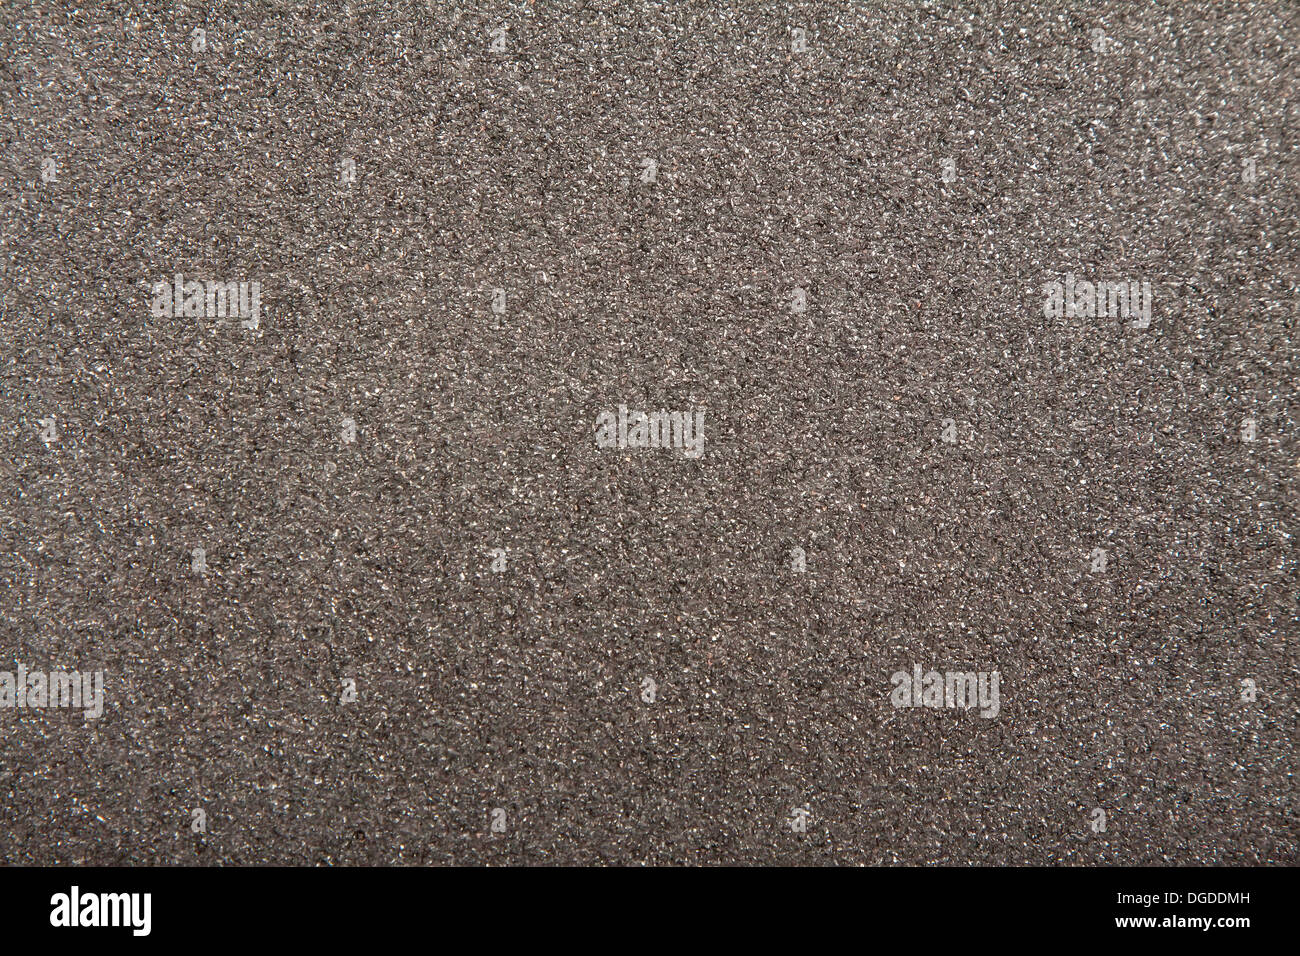 background from surface of emery paper close up Stock Photo